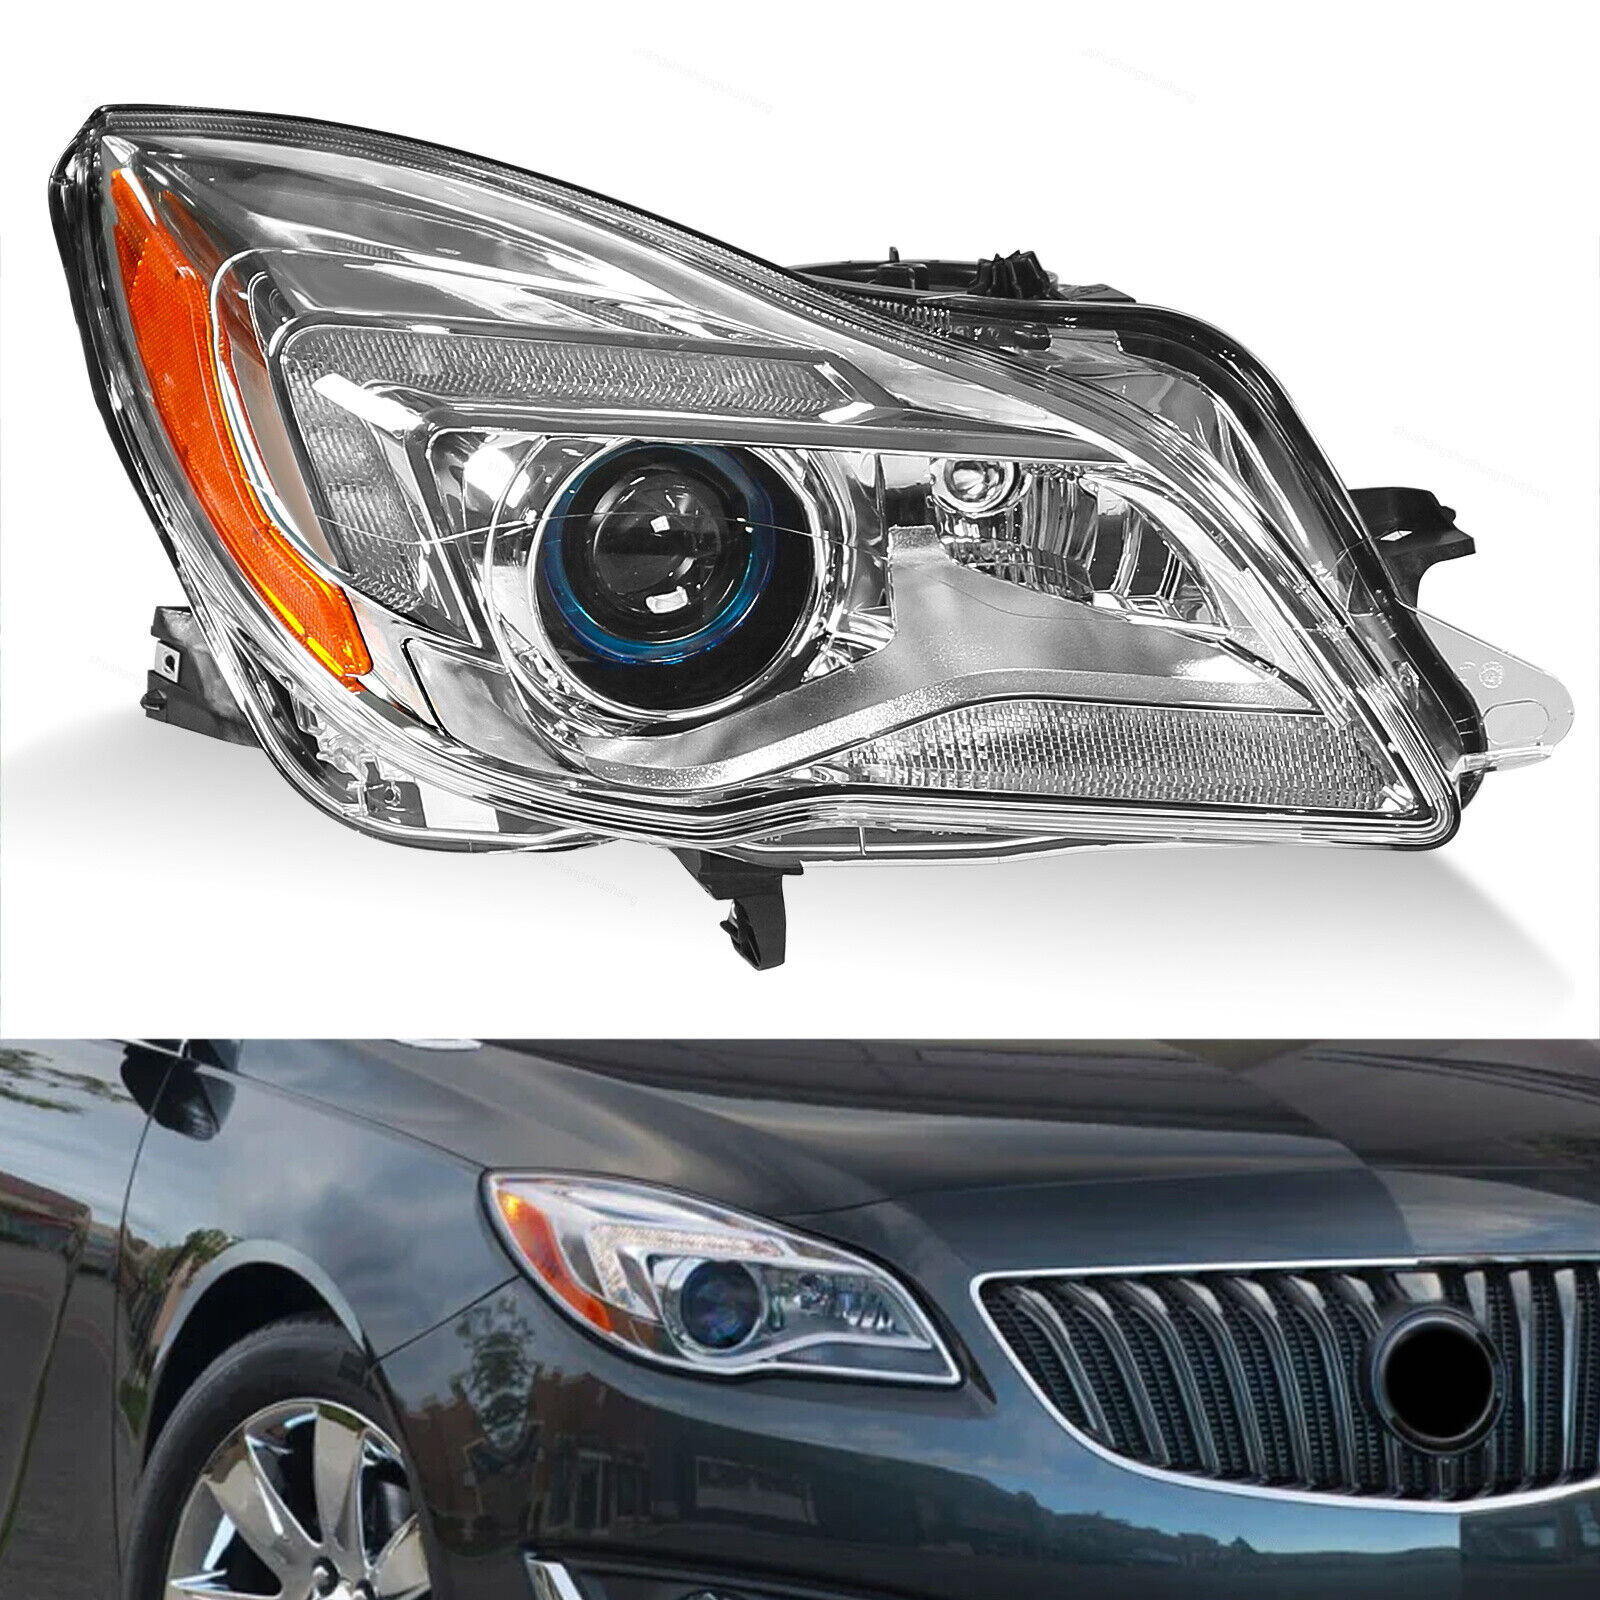 Fits 2014 15-17 Buick Regal HID/Xenon Projector Headlights Headlamps Right Side